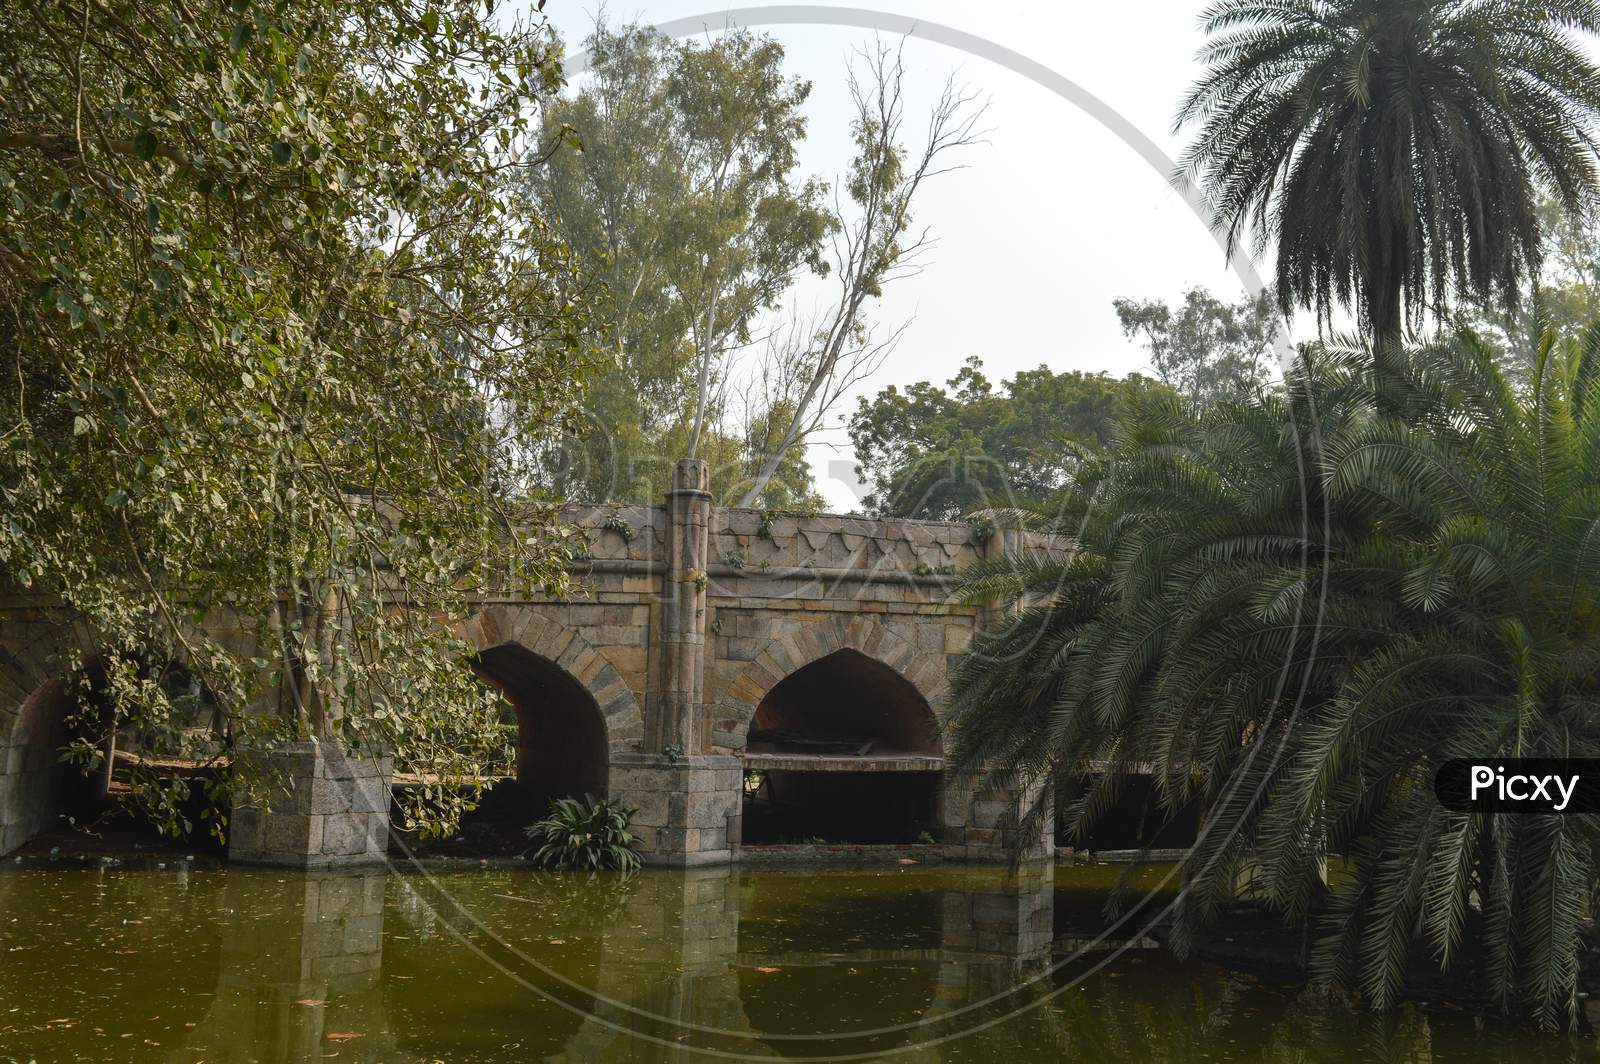 A Reflection And Mesmerizing View From The Side Of The Pond,Lake Of Palm Trees And Bridge Monument At Lodi Garden Or Lodhi Gardens In A City Park At Winter Foggy Morning.